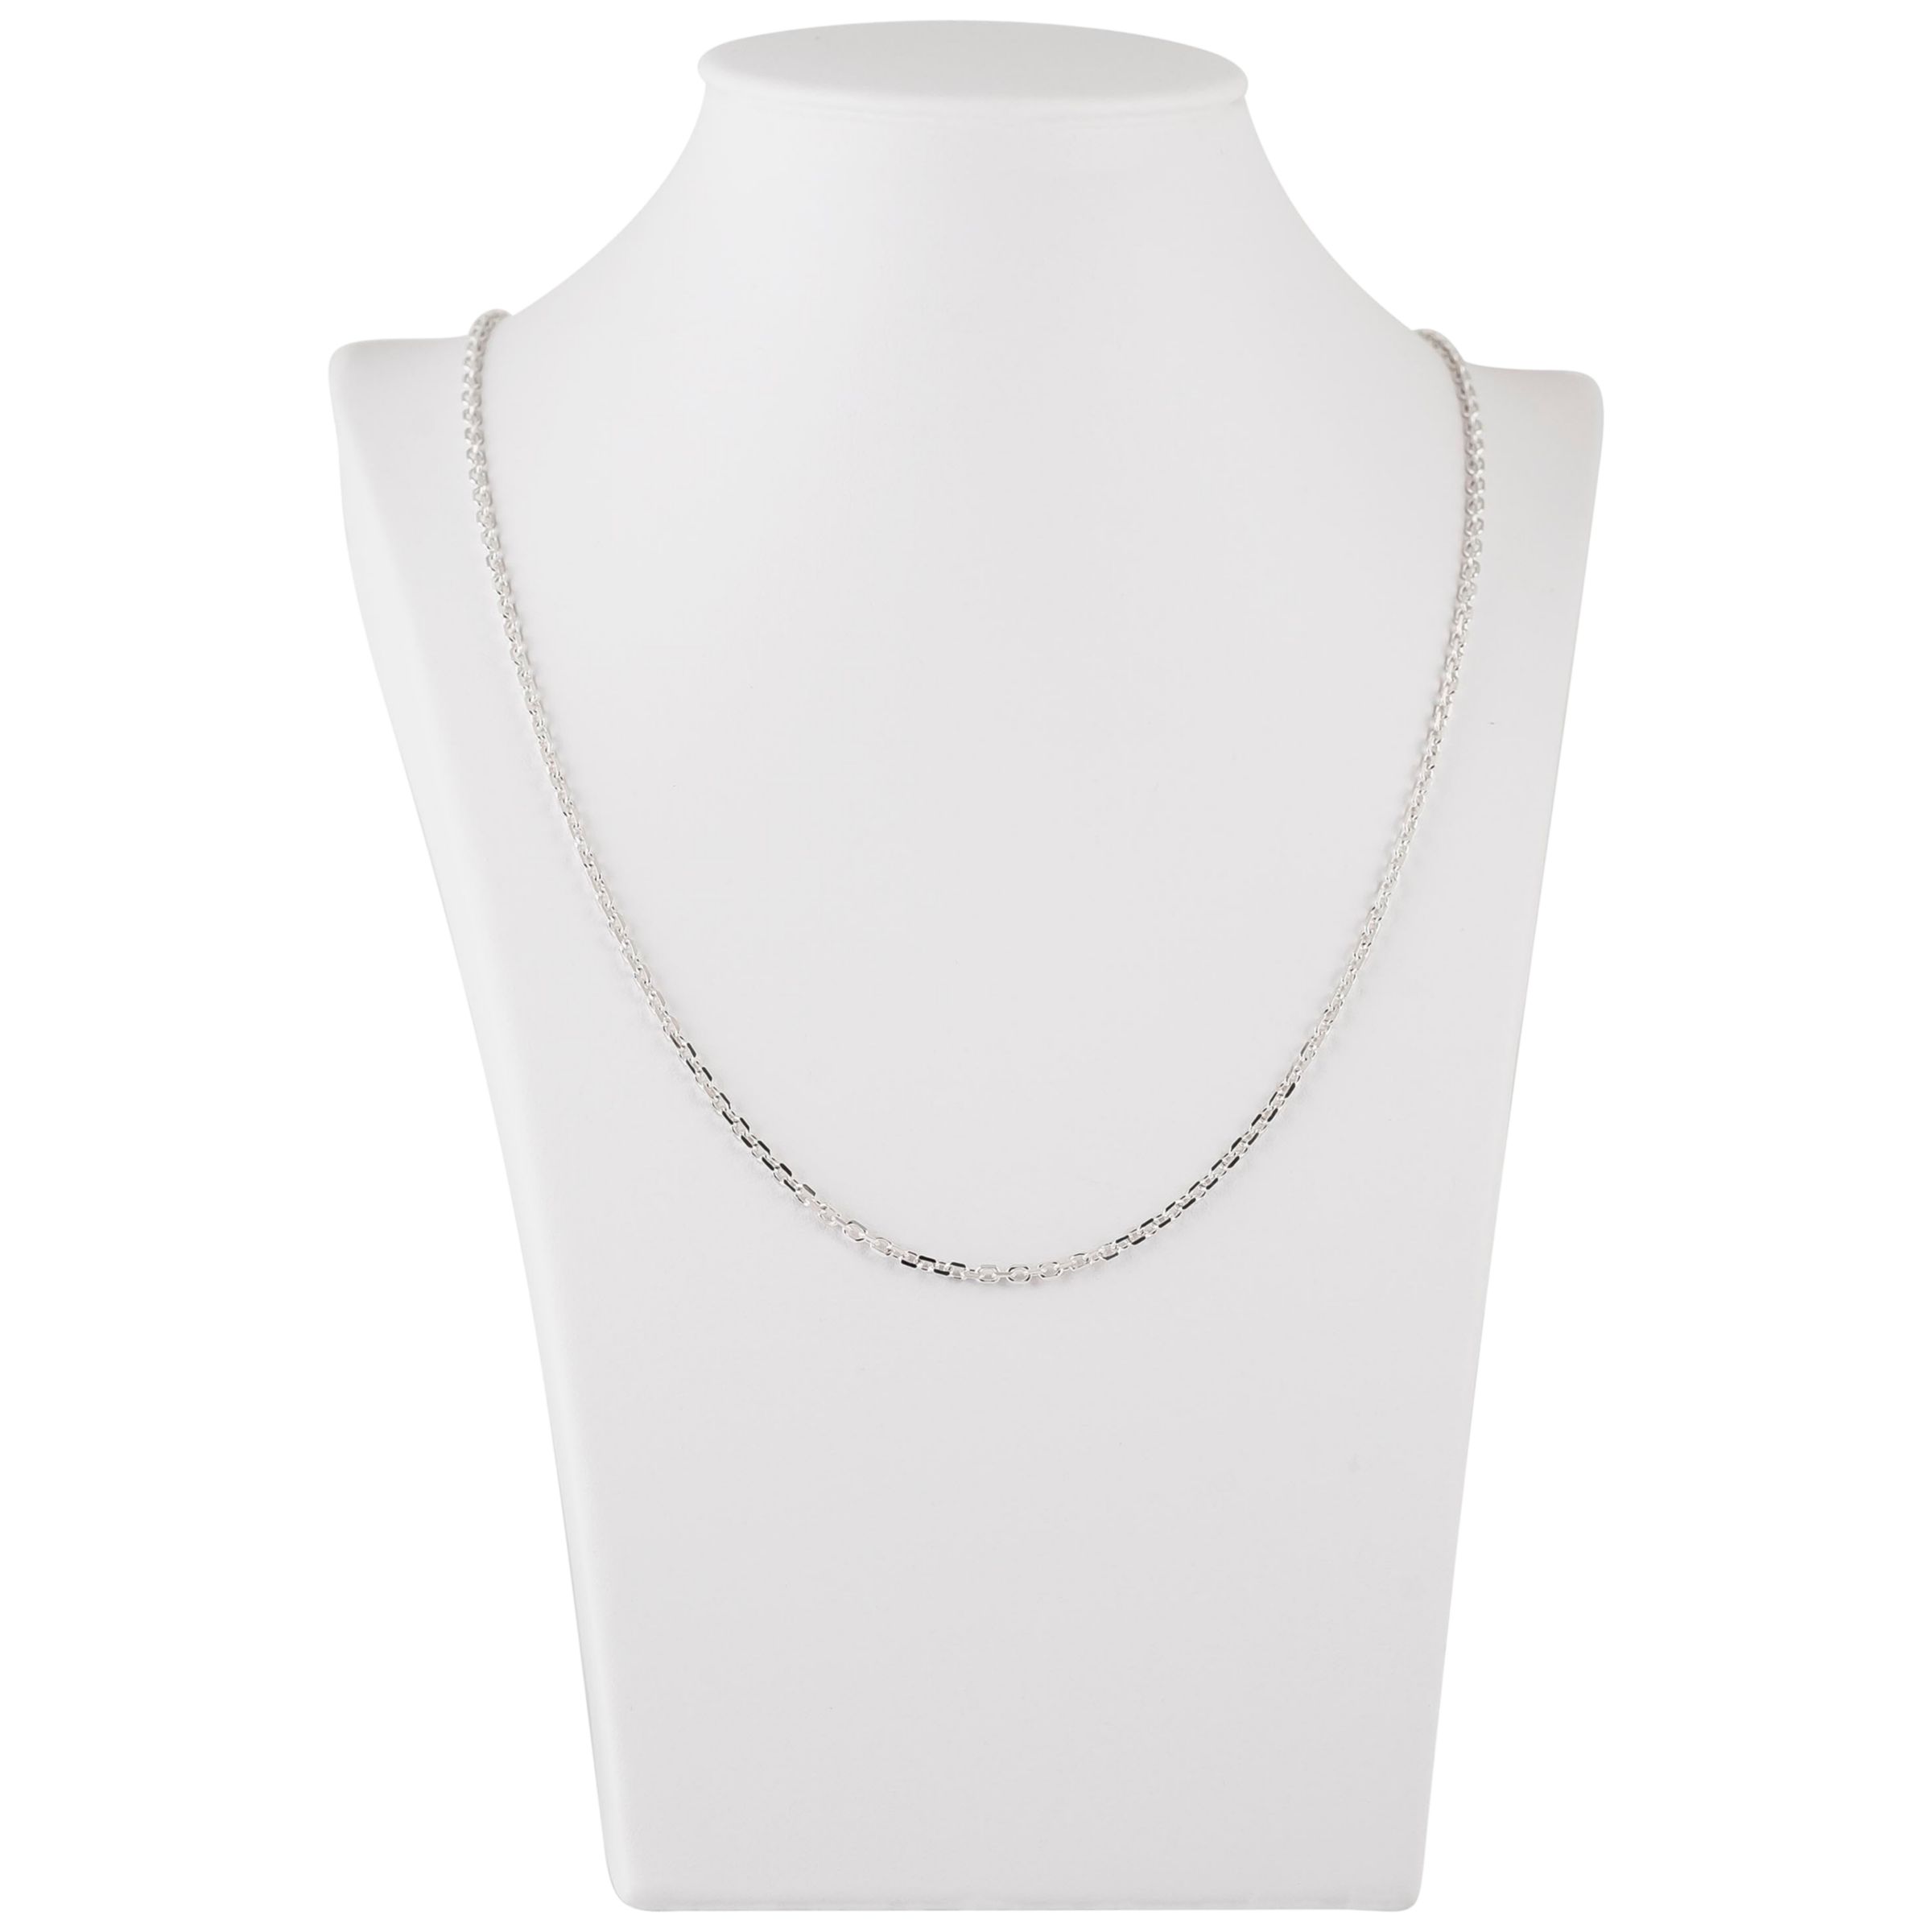 Be-Jewelled Rolo Style Sterling Silver Diamond Cut Chain Necklace, Silver